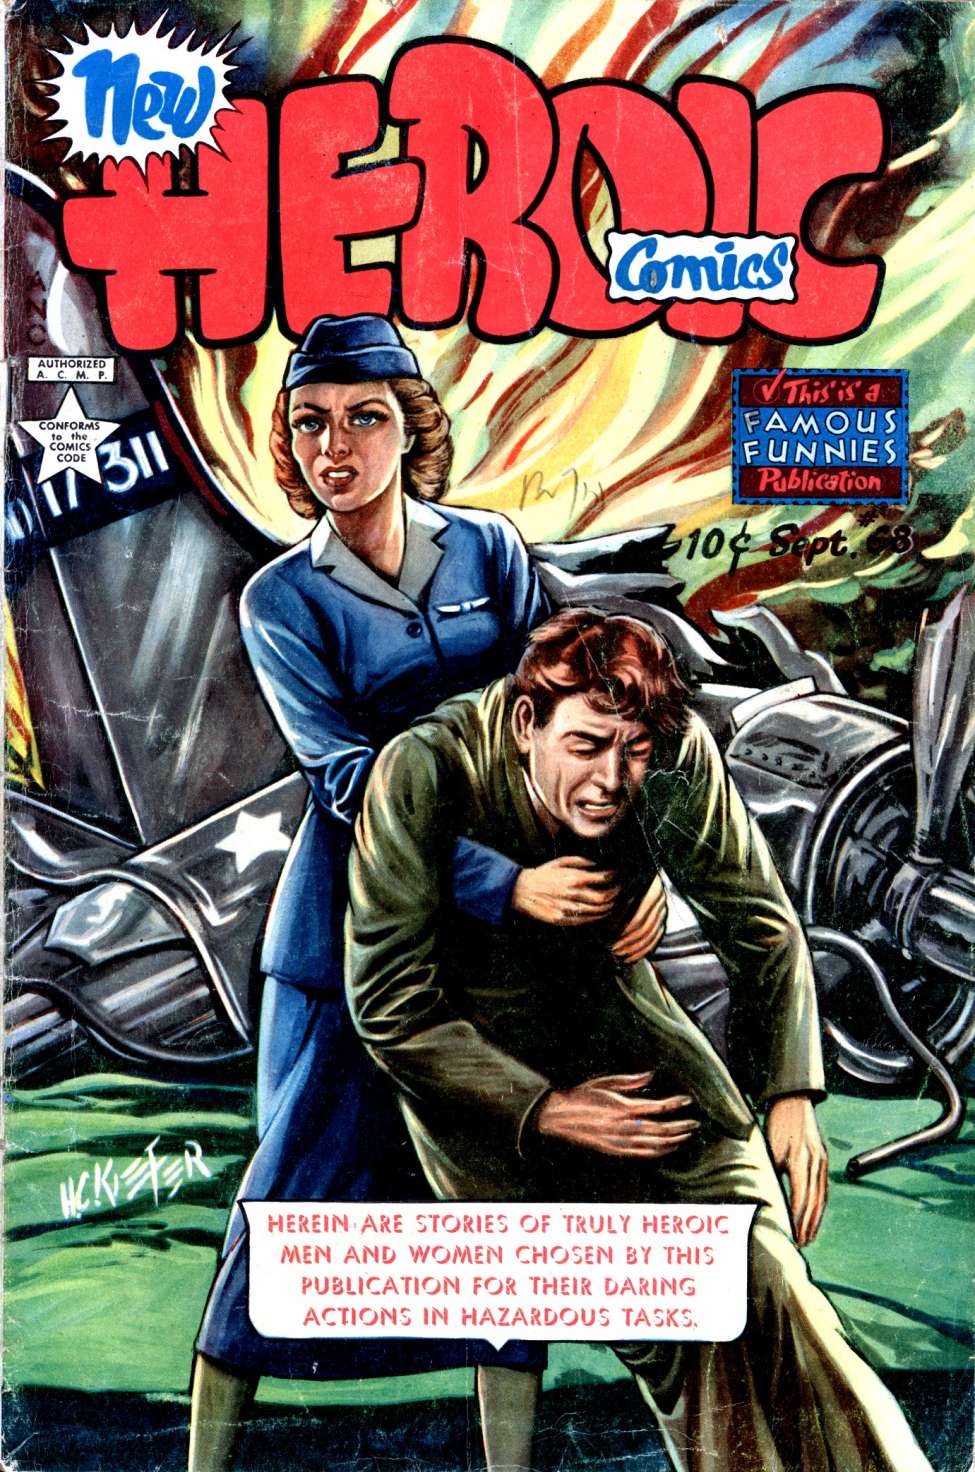 Book Cover For New Heroic Comics 68